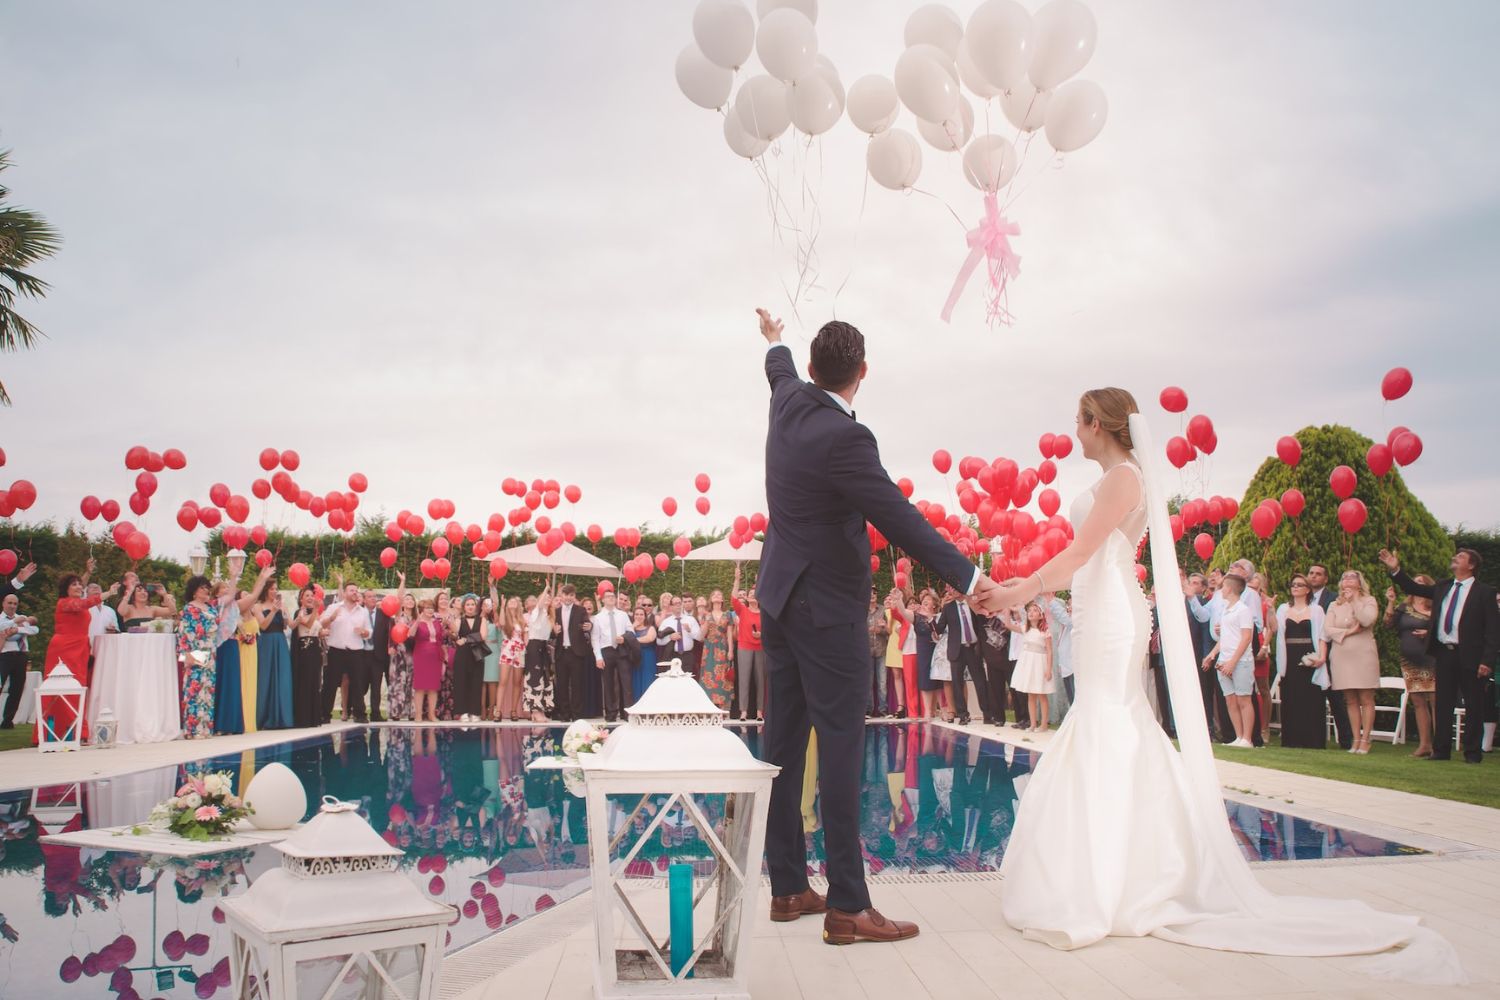 The Details That Made This Celebration the Best Wedding Ever